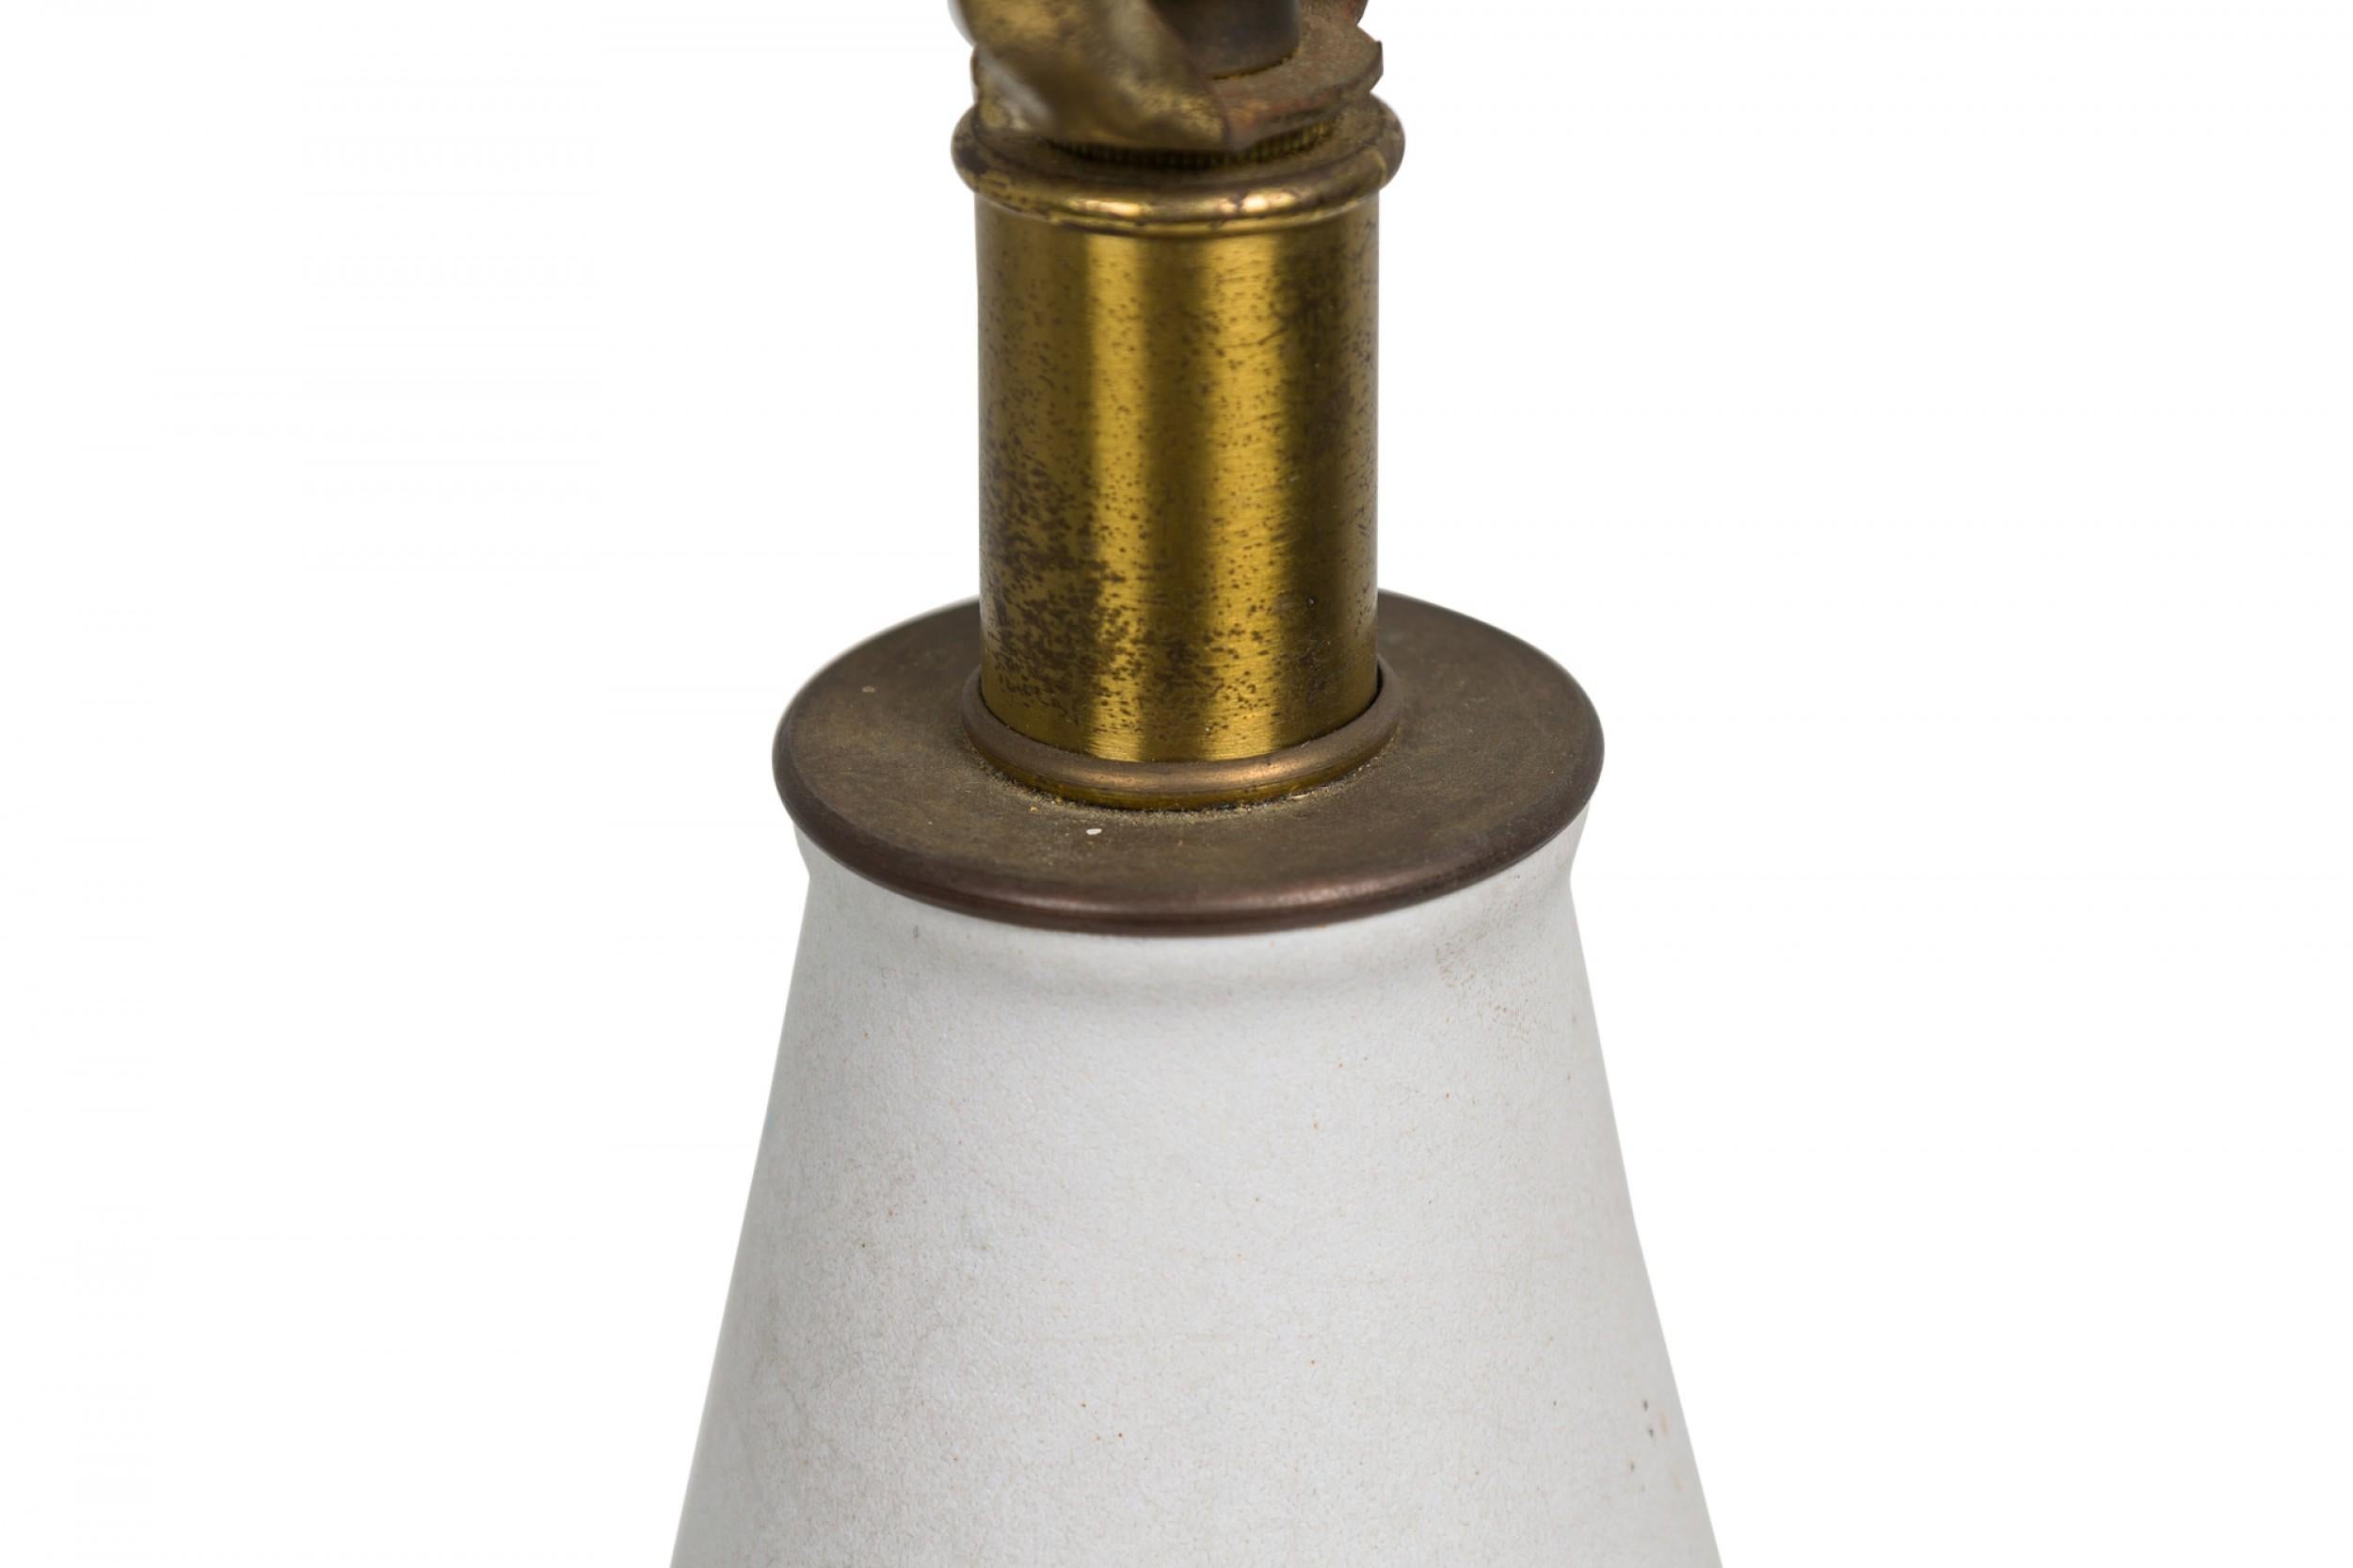 Mid-Century American ceramic table lamp in cylindrical form, tapering toward the top with a fitted brass functioning light switch, a heavily textured bark-like banded mid section ending in a tapered ring-footed bottom, fired in an opaque white matte